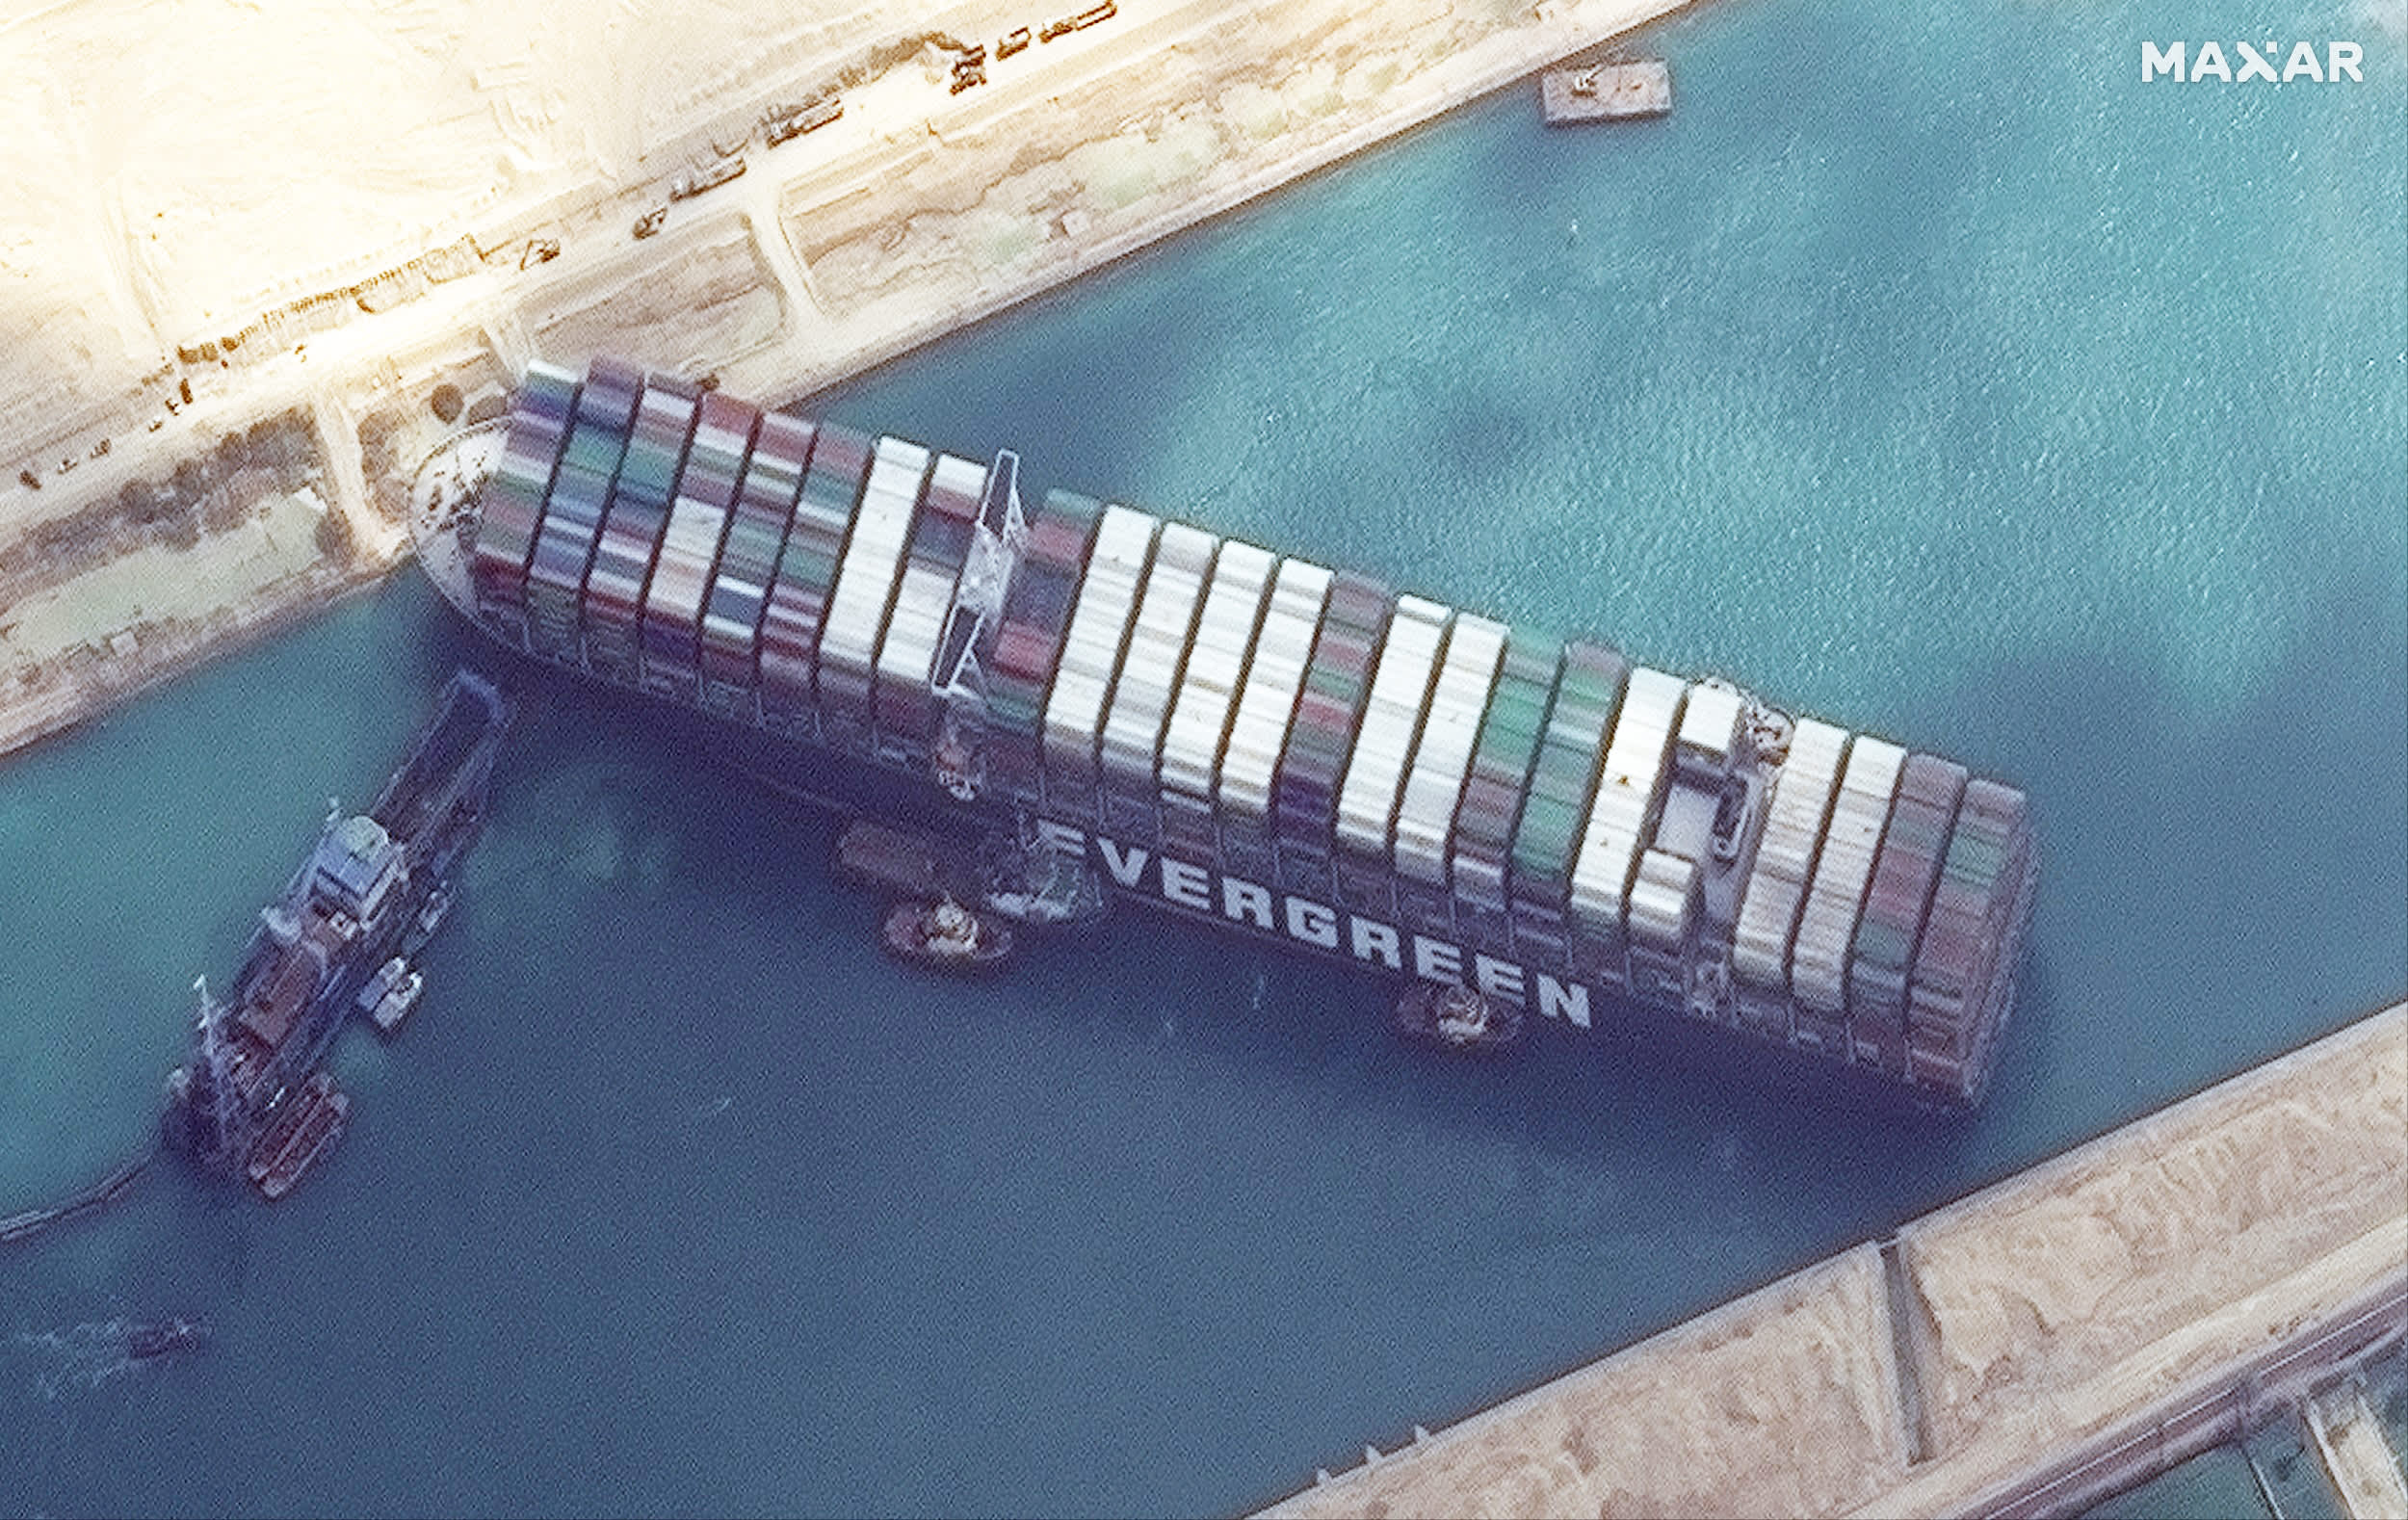 106860121-1616780983446-106860121-1616772119794-02_close_up_view_of_ever_given_ship_suez_canal_26march2021_wv2.jpg